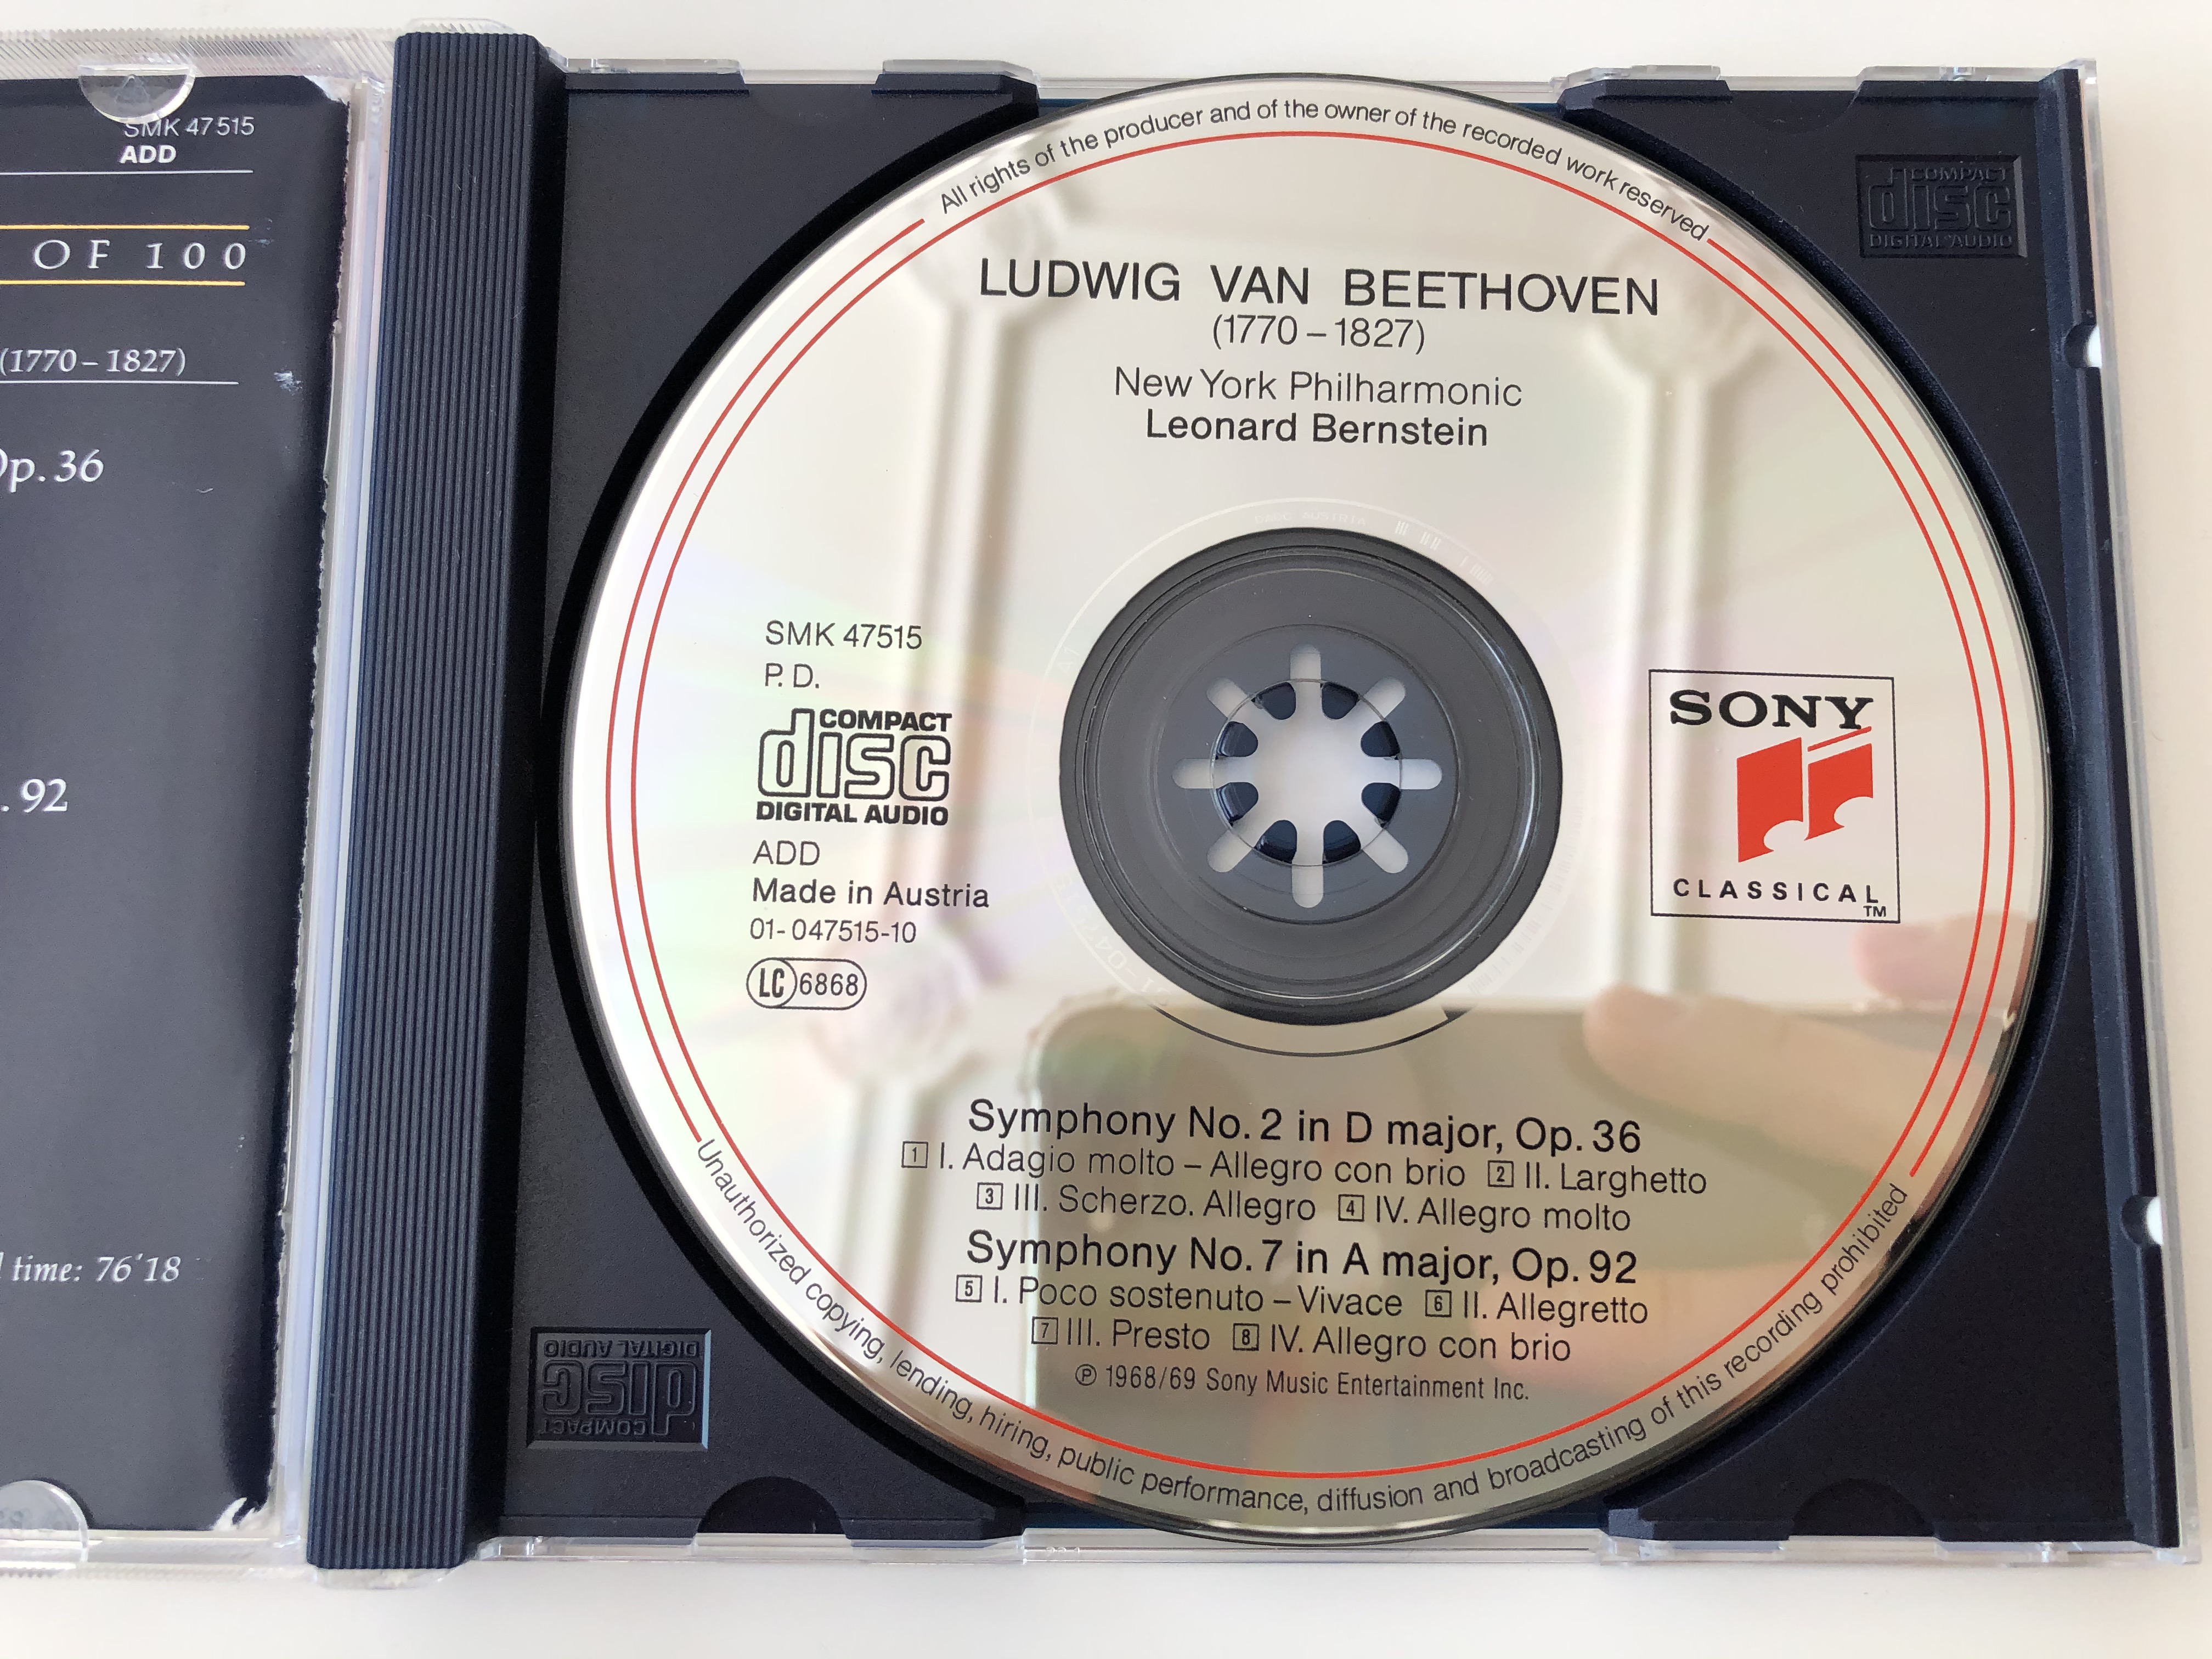 leonard-bernstein-beethoven-symphonies-no.-2-no.-7-new-york-philharmonic-the-royal-edition-painting-by-h.-r.-h.-the-prince-of-wales-no.-4-of-100-sony-classical-audio-cd-1992-smk-475-6-.jpg